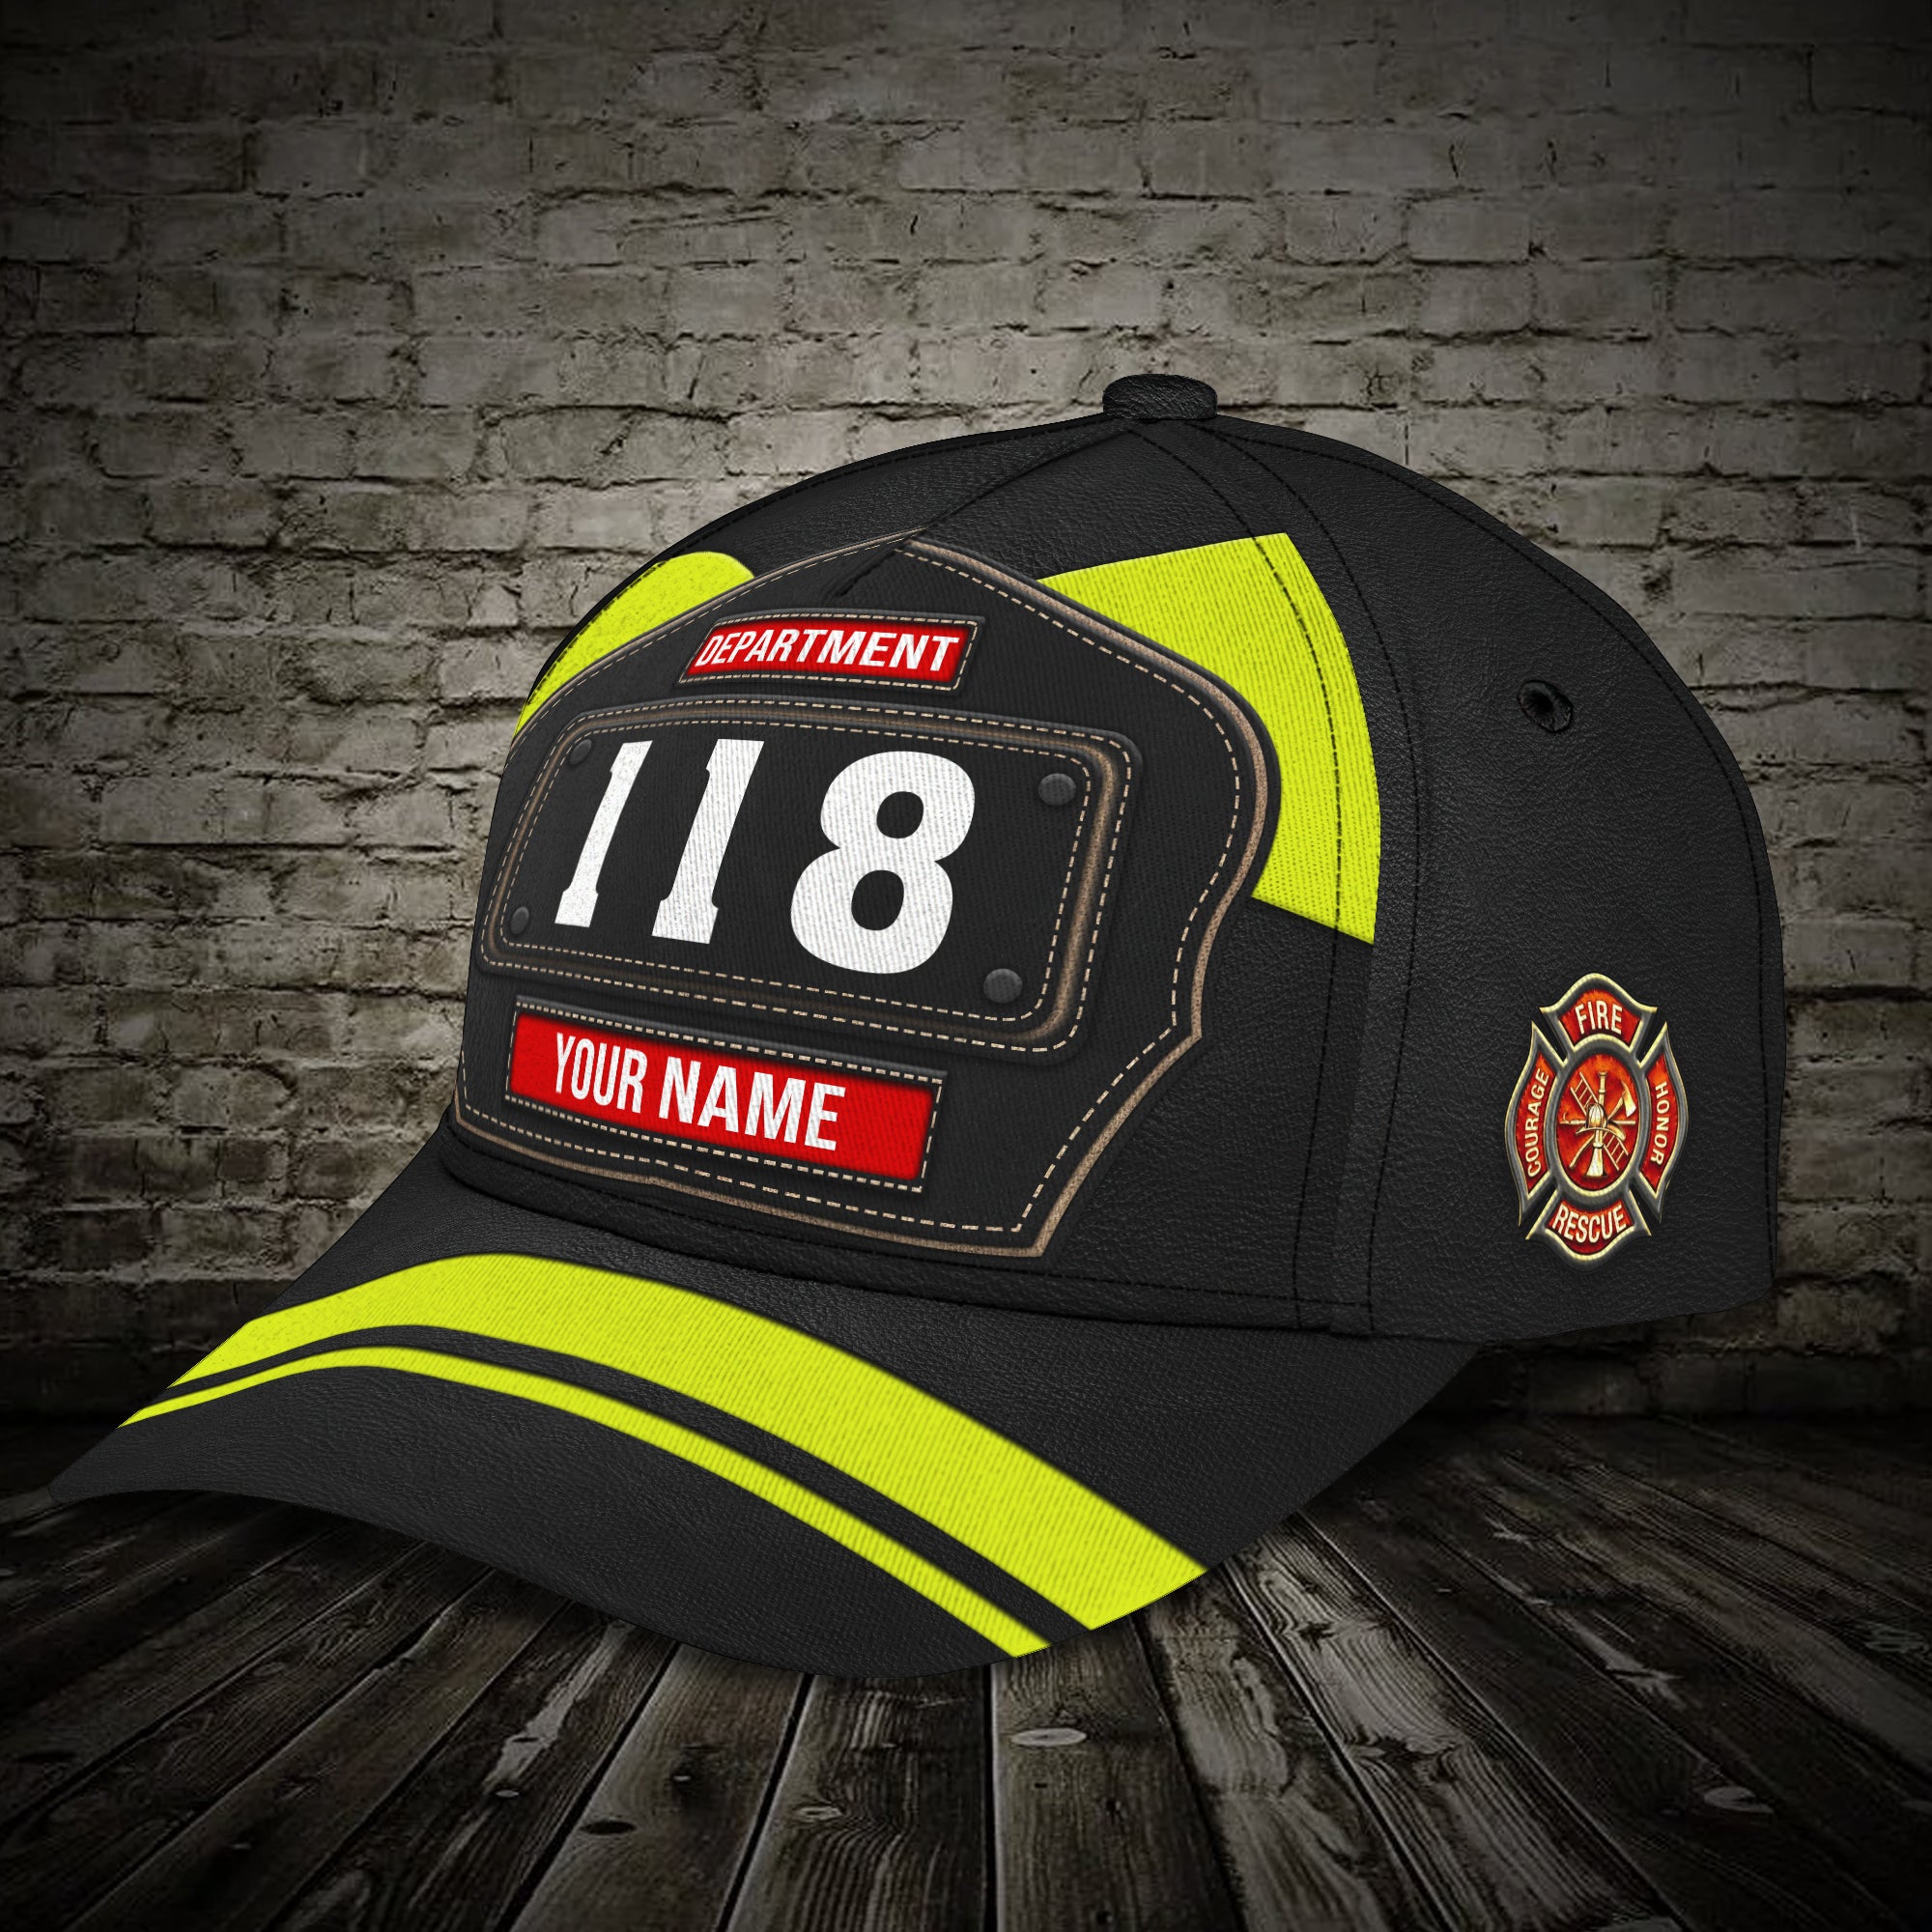 Firefighter V3 - Personalized Name Cap - Co98